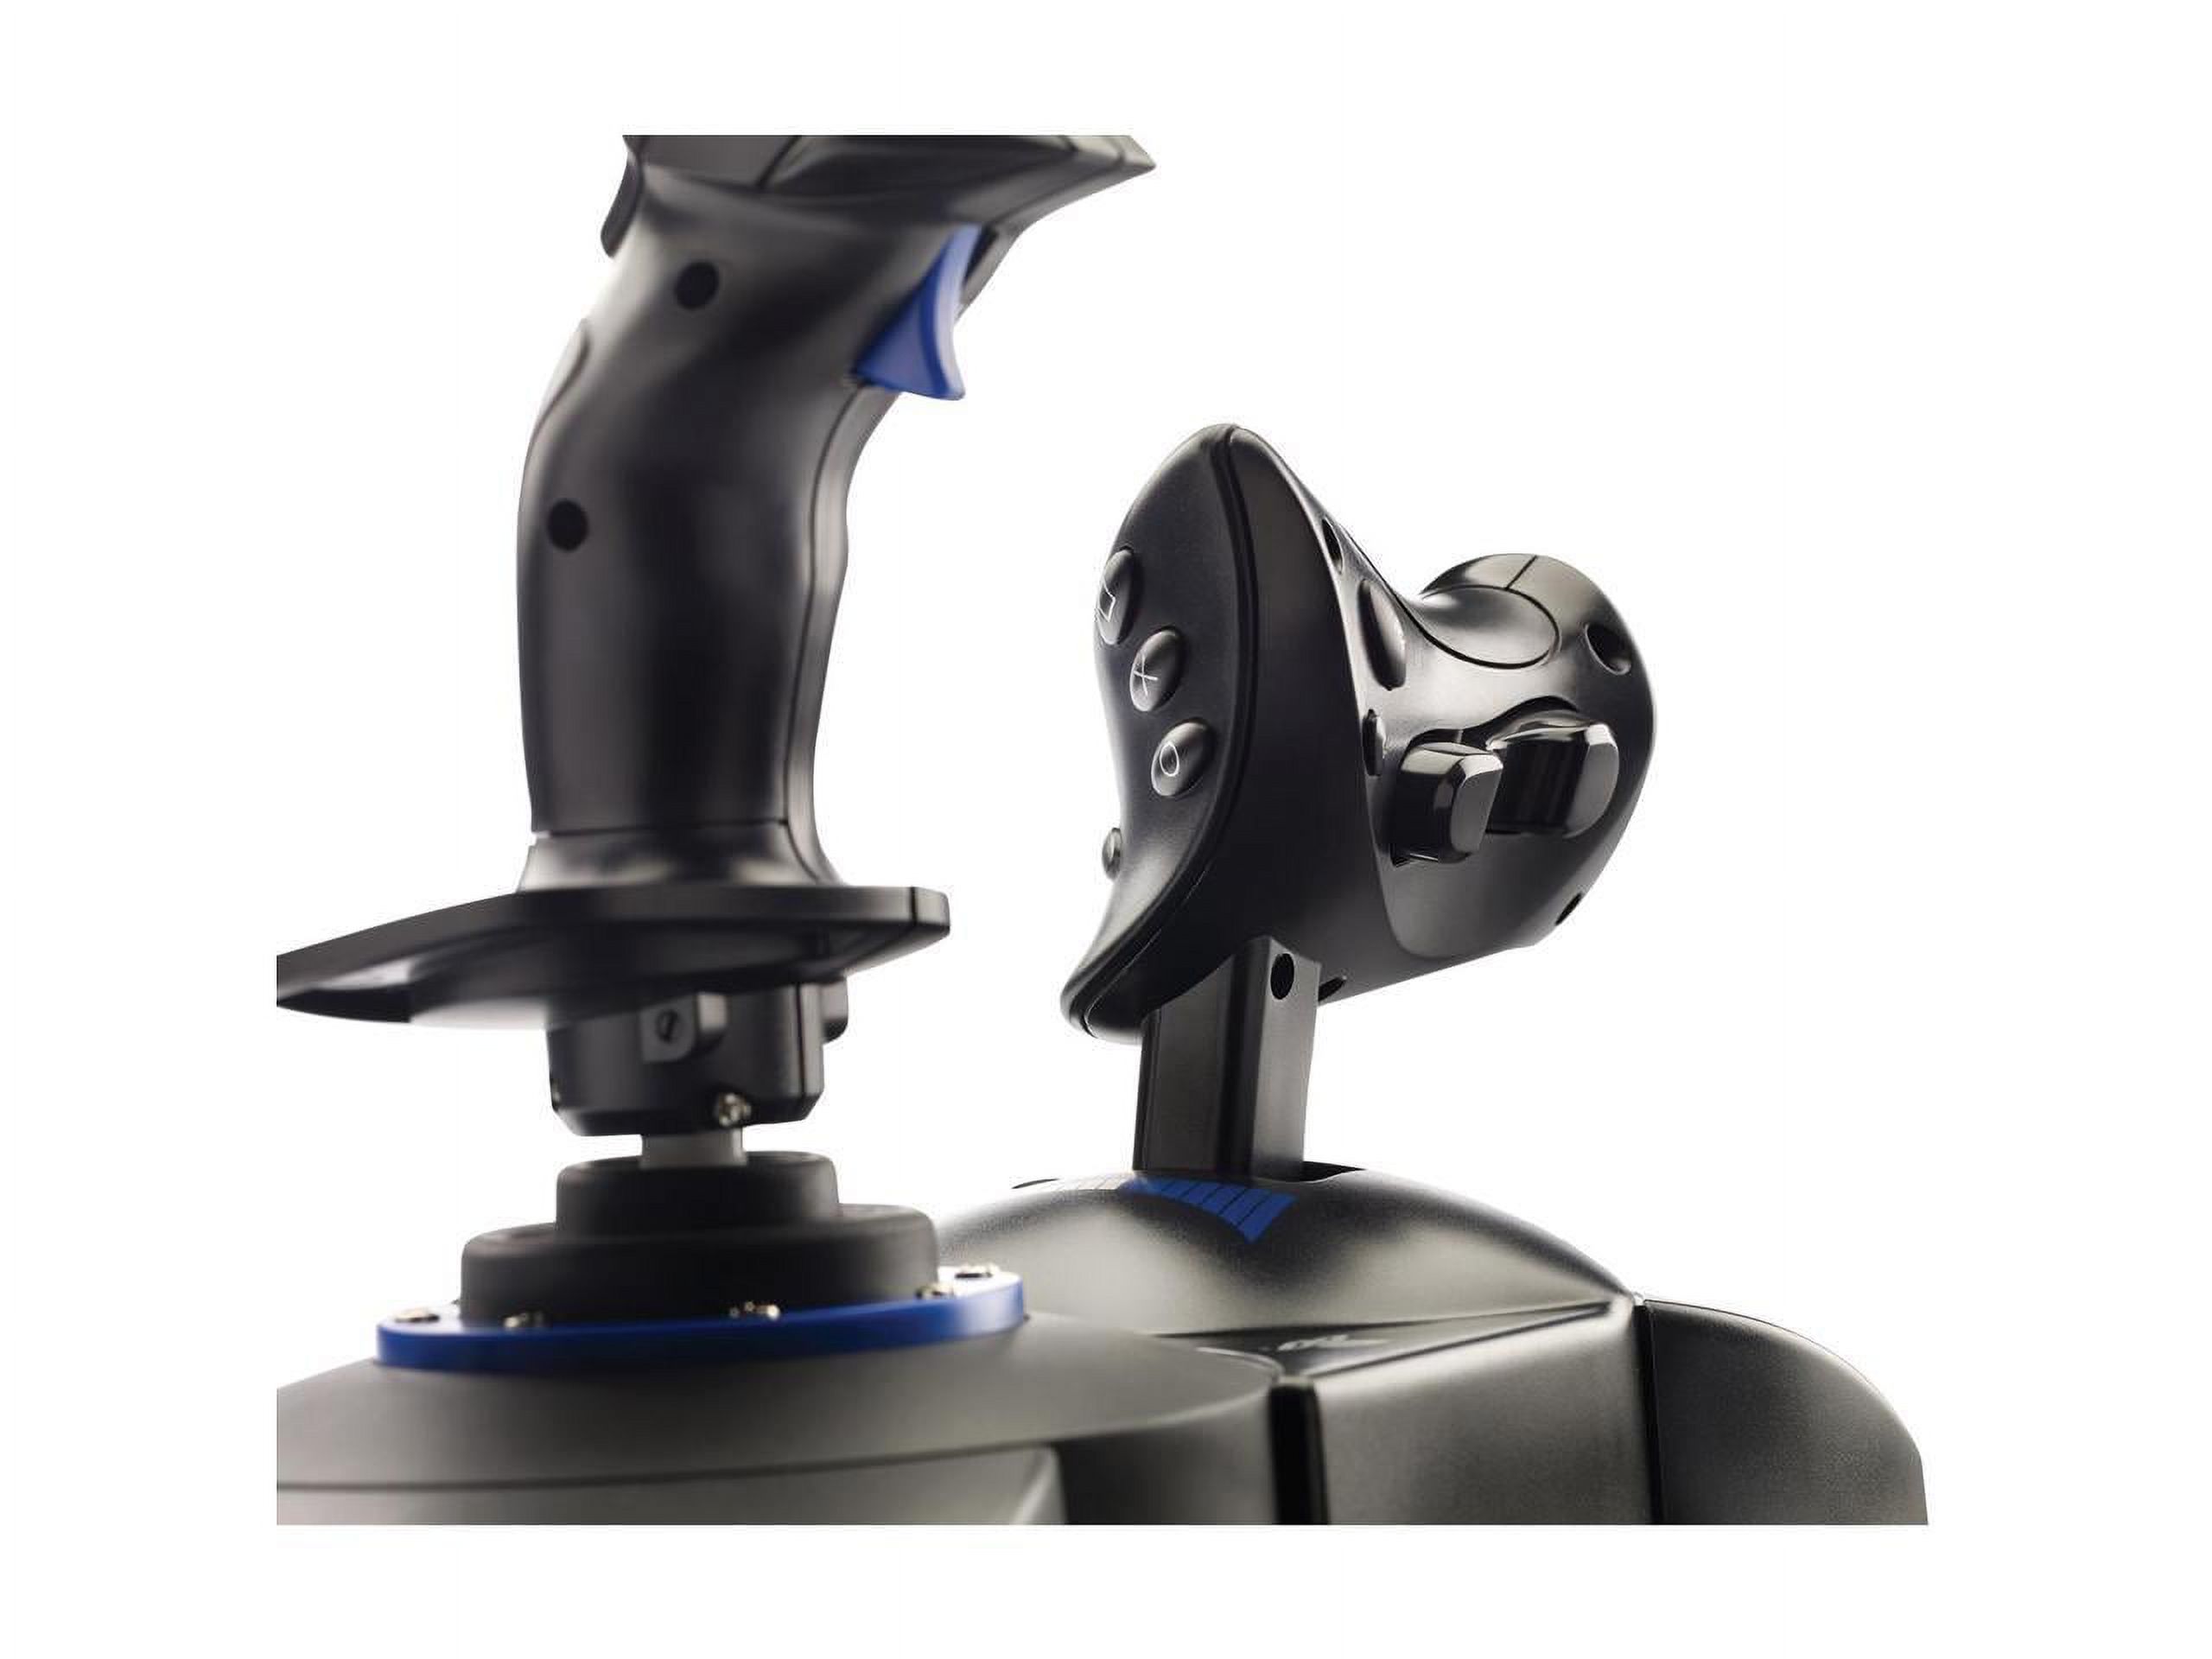 Thrustmaster T-Flight Hotas 4 - Joystick and Throttle - Wired - for Sony PlayStation 4 - image 3 of 14